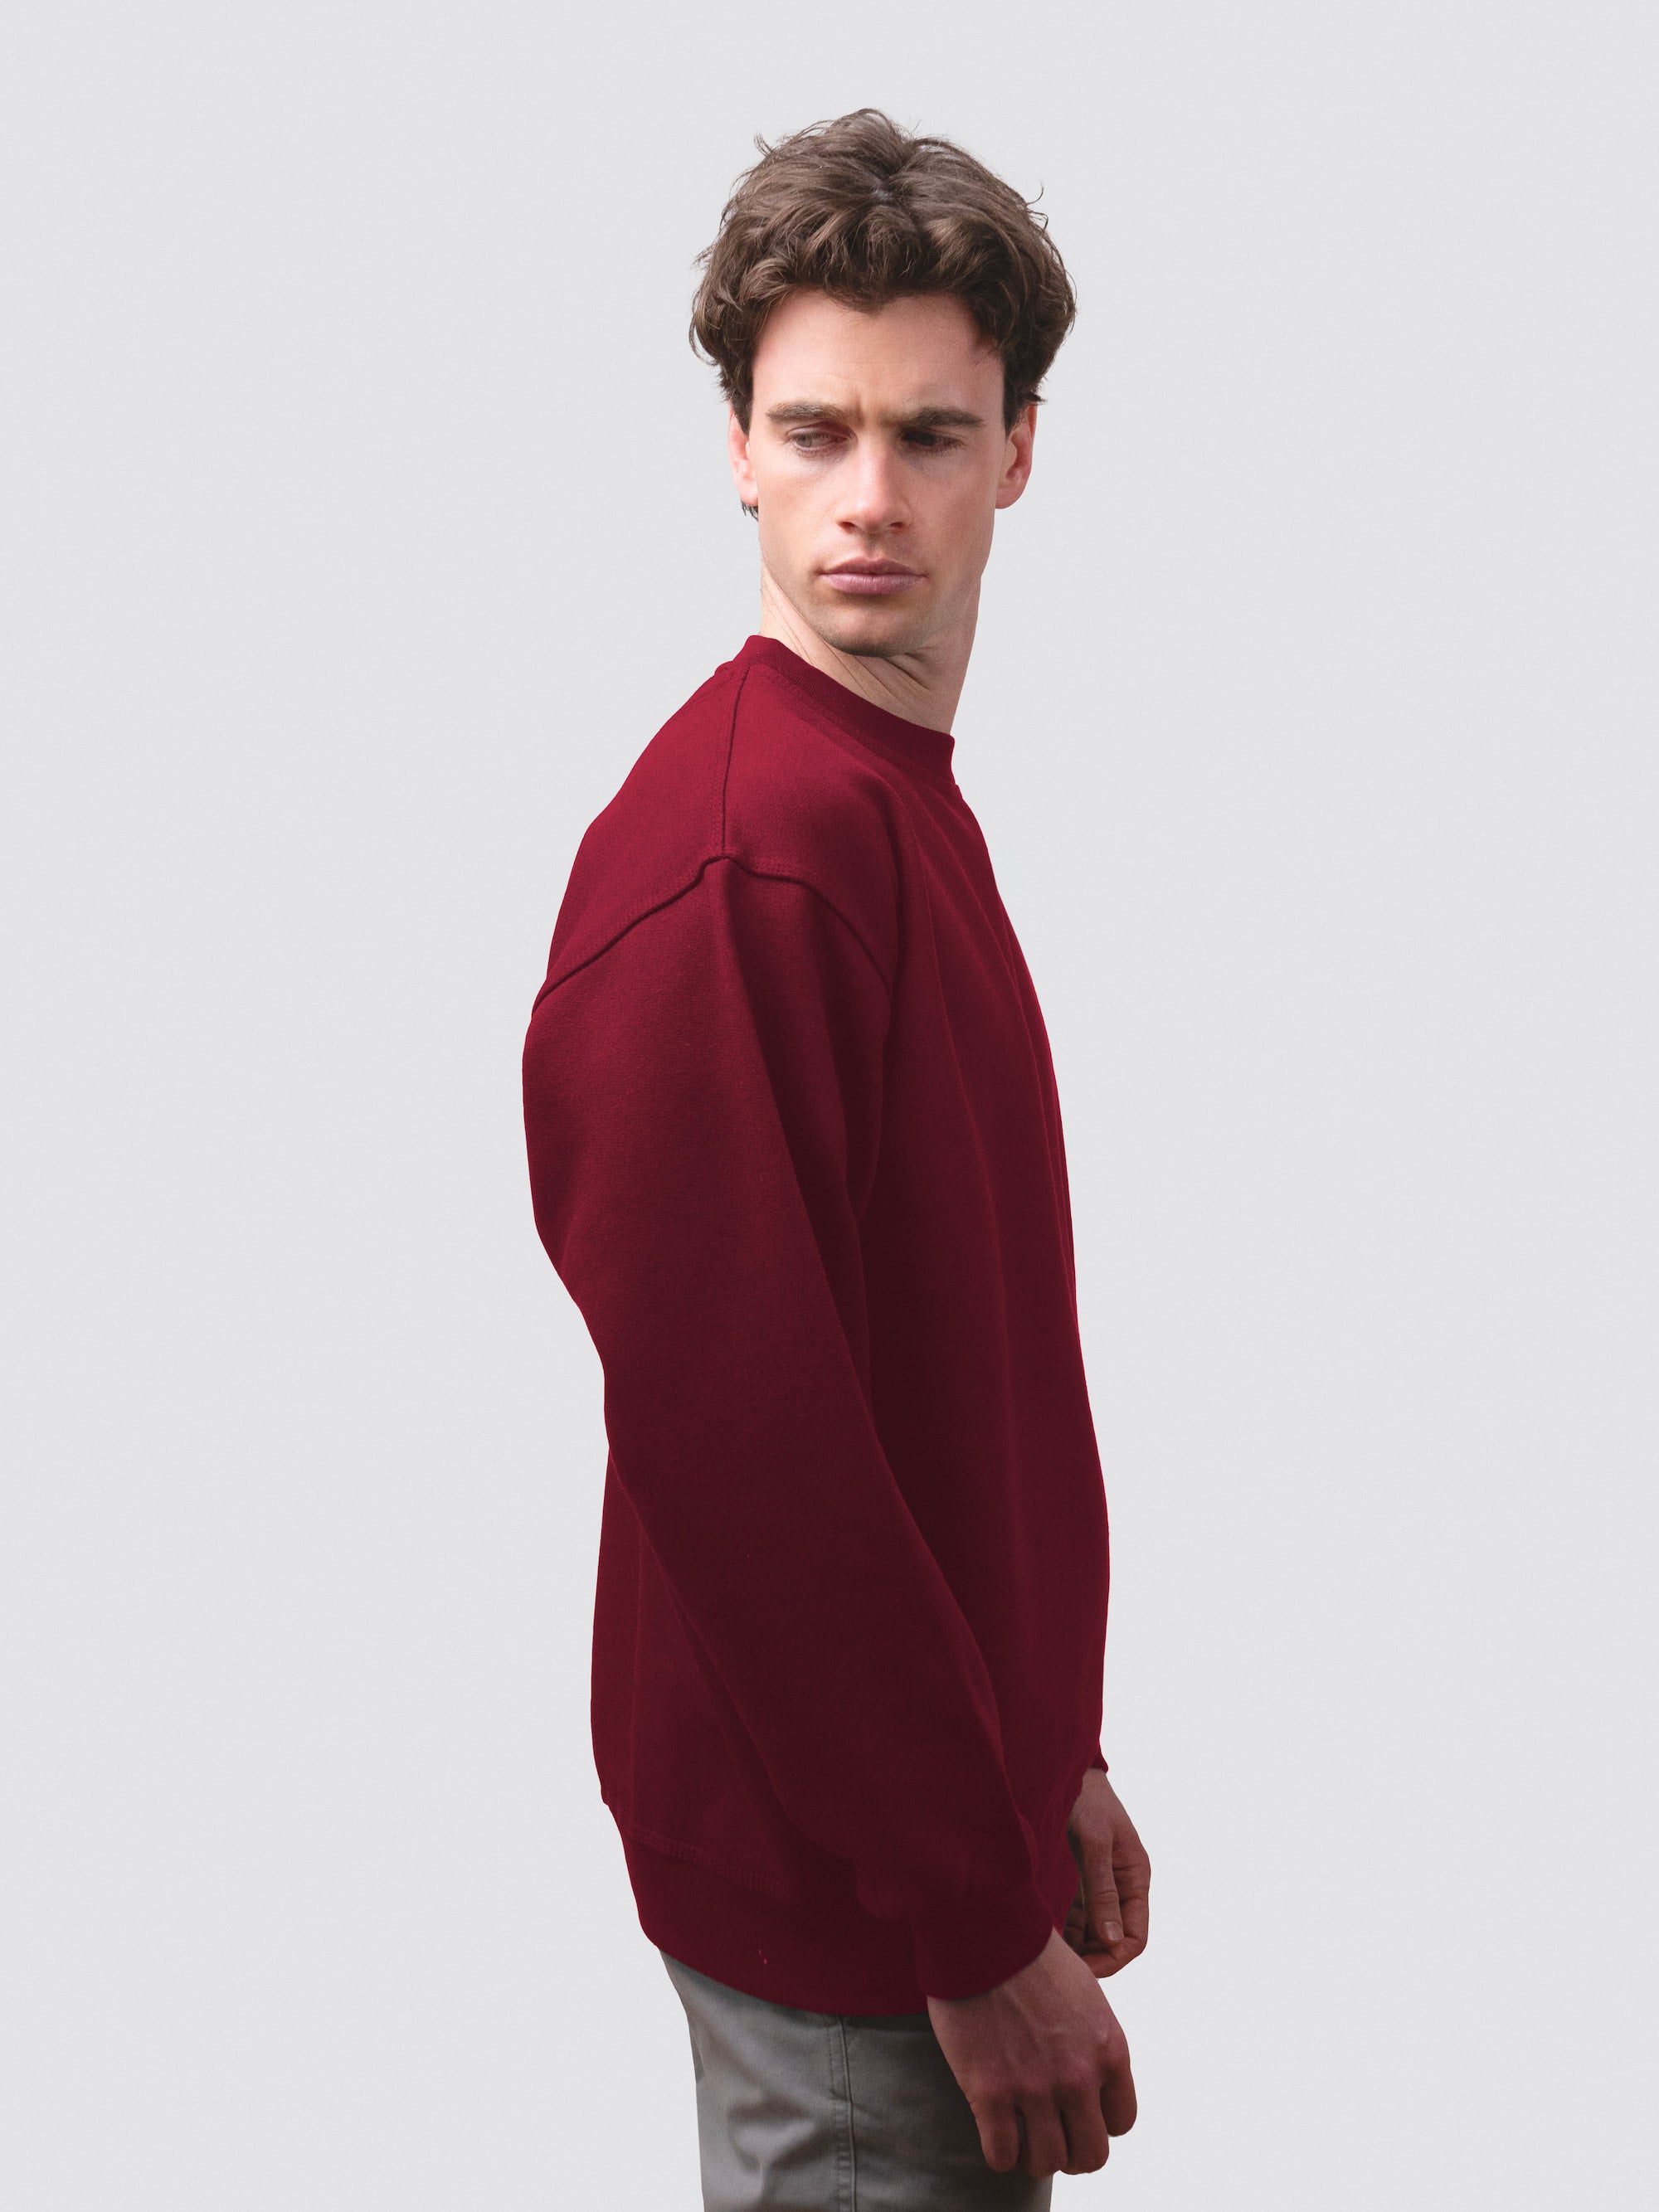 Burgundy, Oxford sweater made from heavy fabric